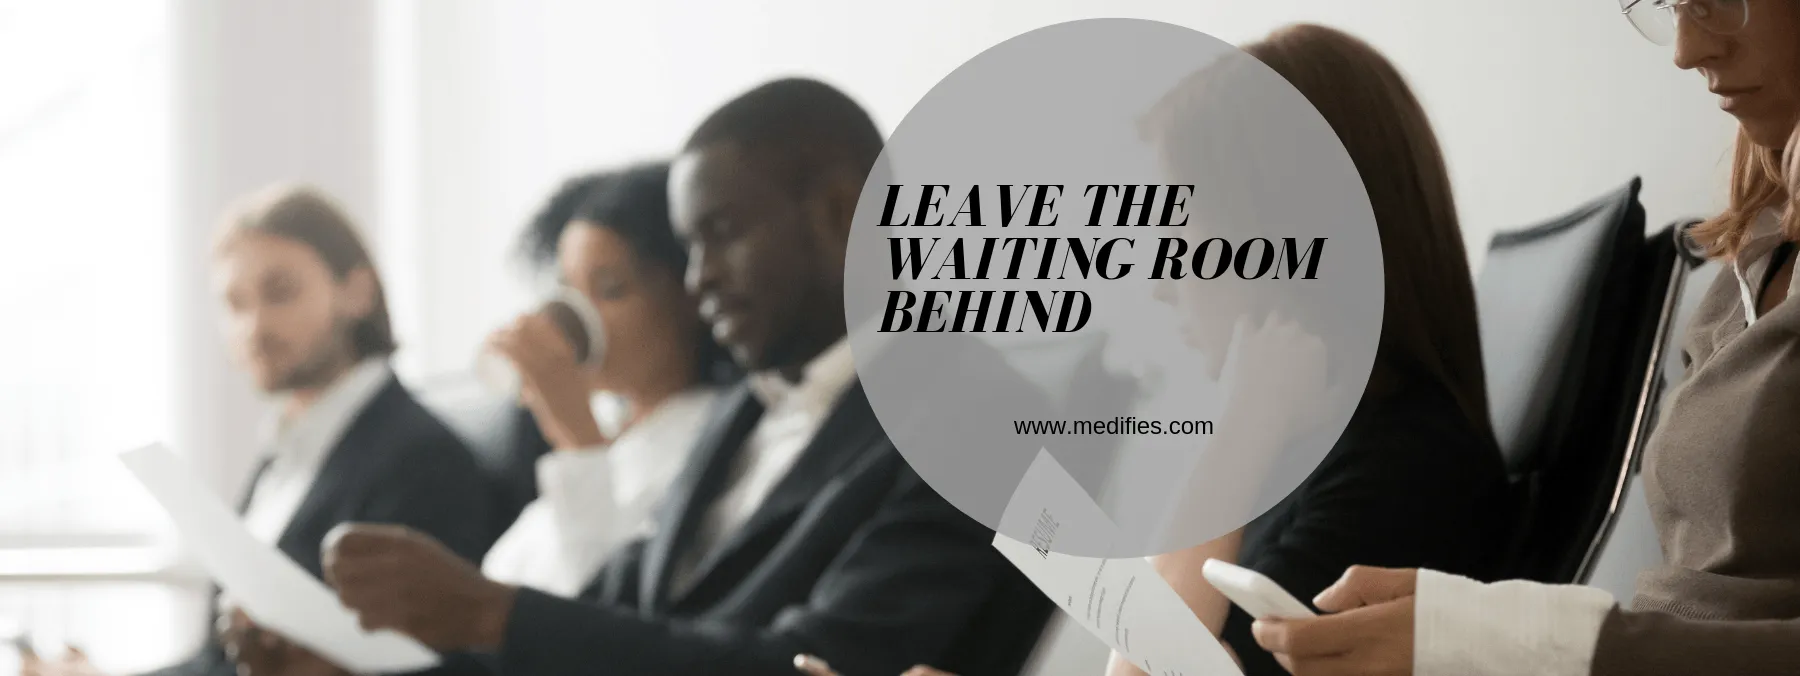 LEAVE THE WAITING ROOM BEHIND